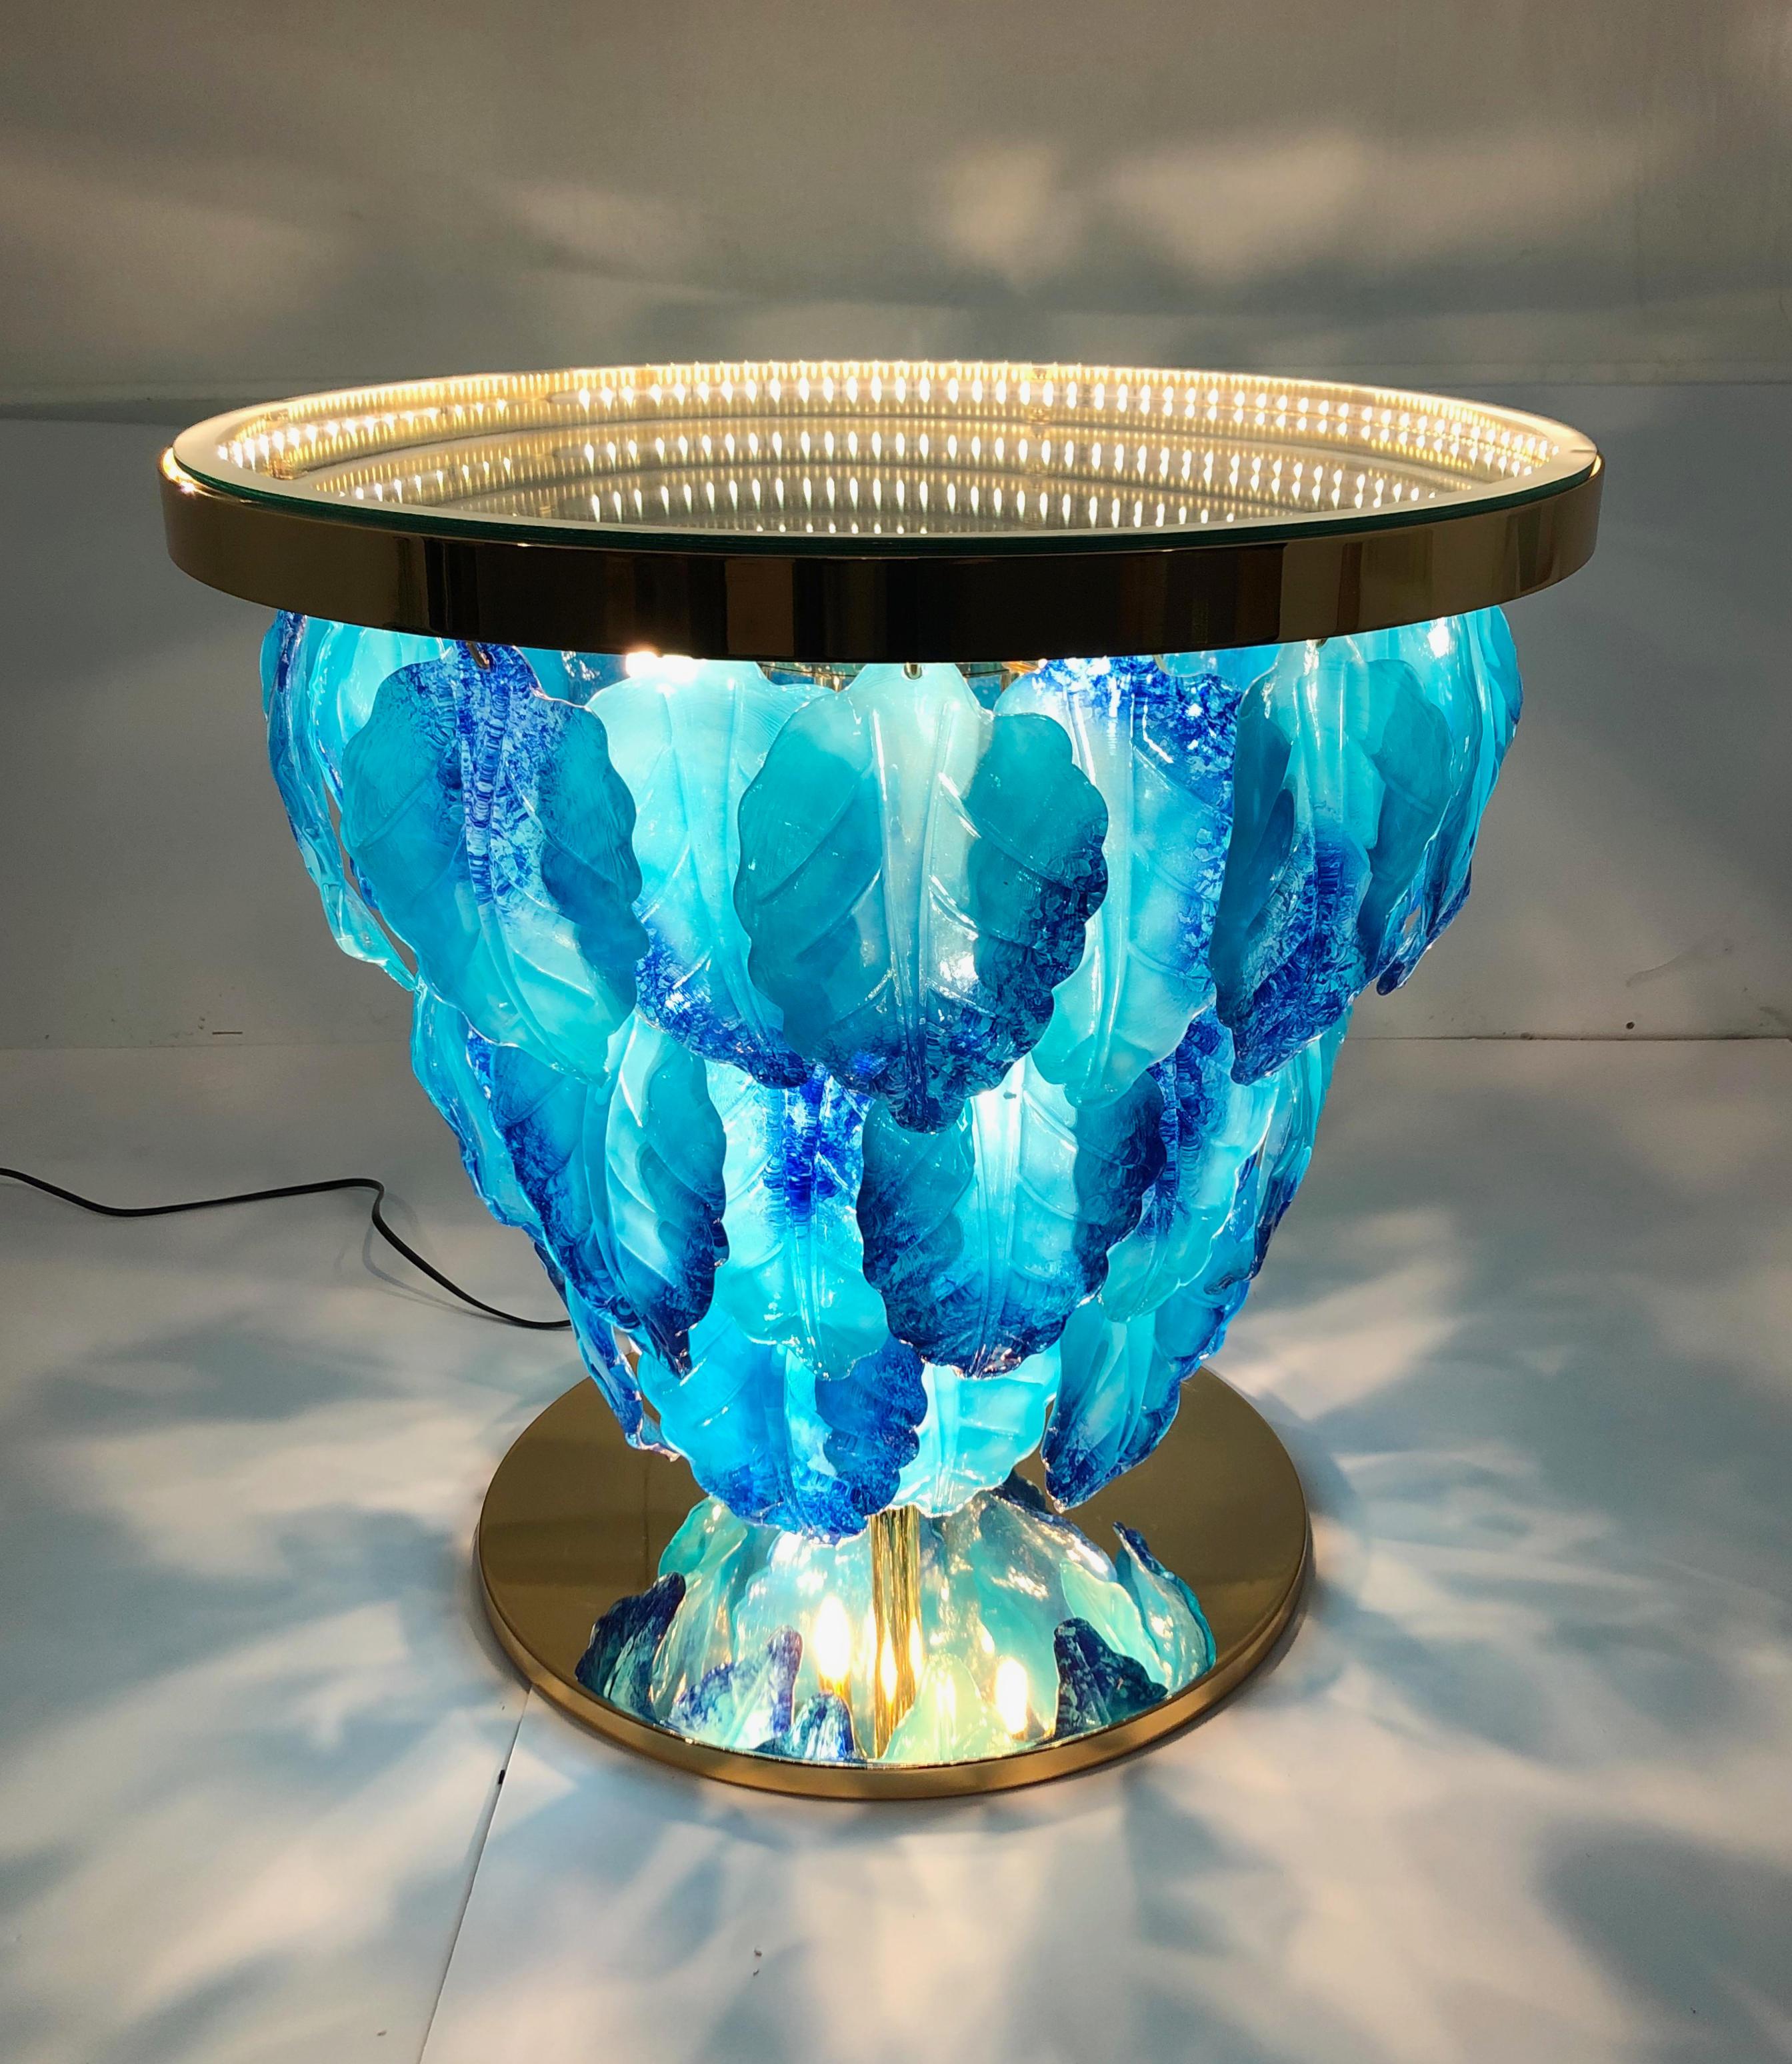 Modern Italian illuminated table with infinity lit mirror, dressed with blue and aquamarine Murano glass leaves mounted on 24K gold plated metal base / Designed by Fabio Bergomi for Fabio Ltd / Made in Italy
LED type lights
Diameter: 27.5 inches /